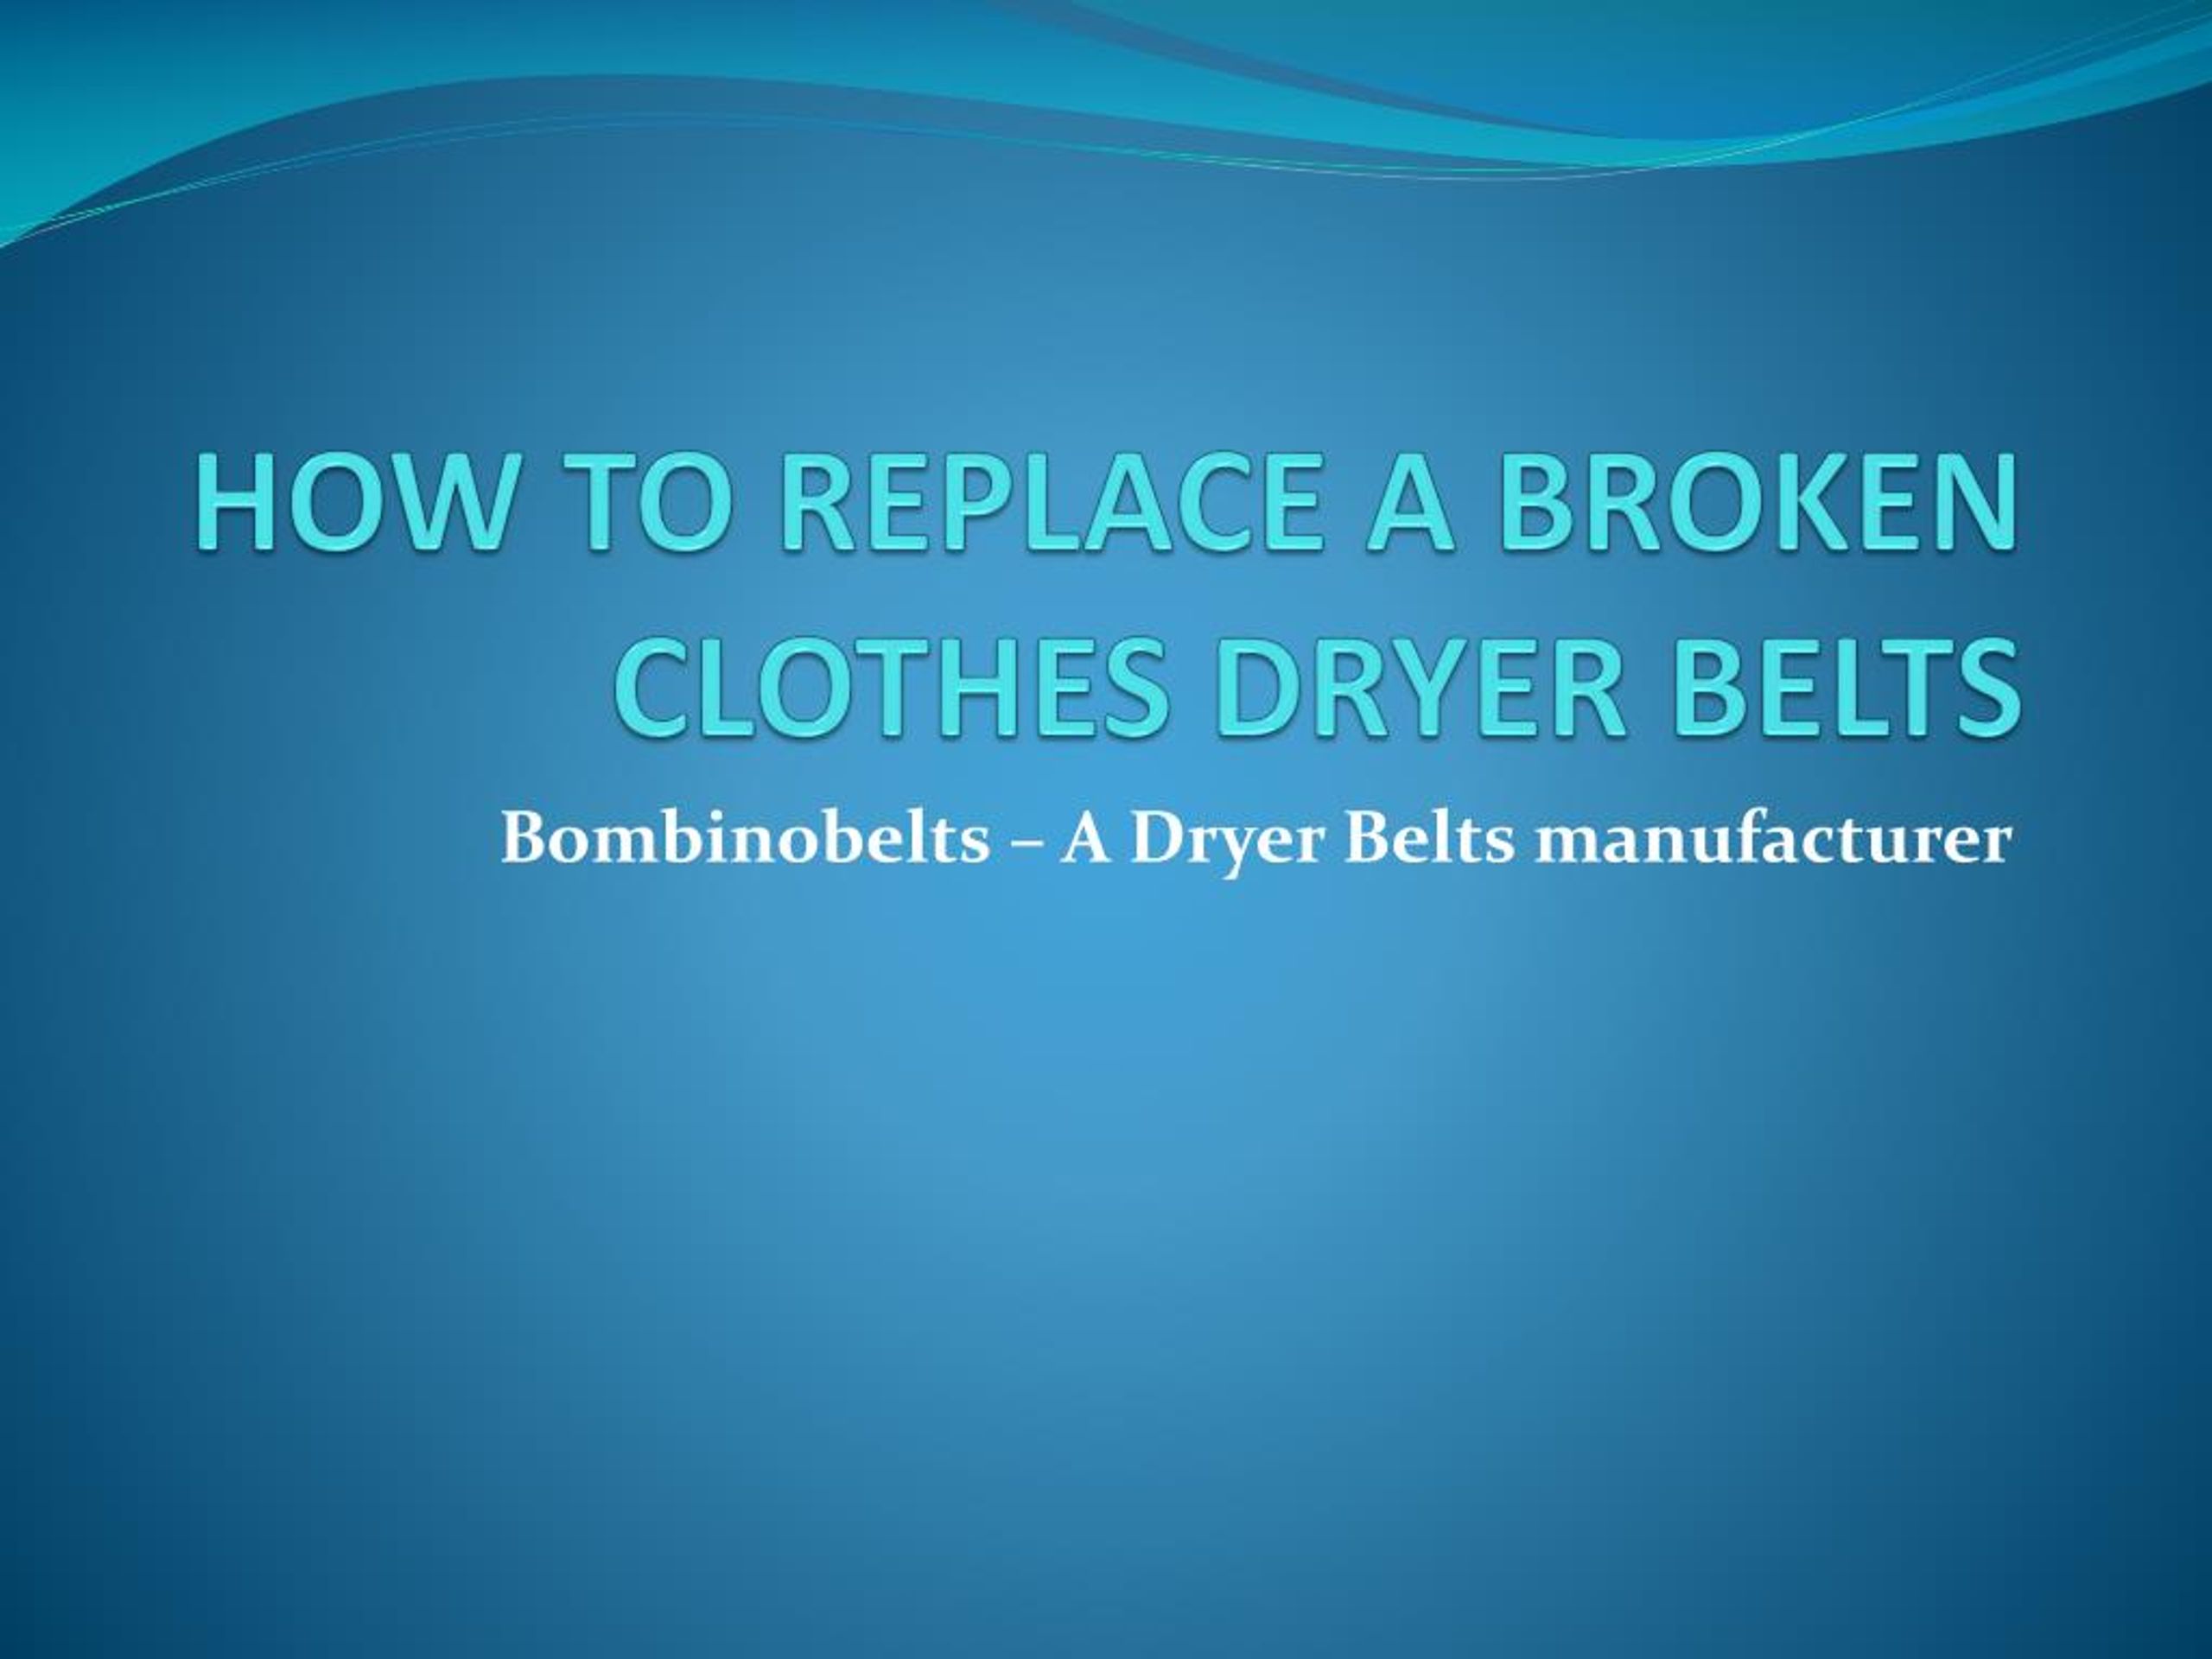 PPT - How to replace a broken clothes dryer belts PowerPoint ...